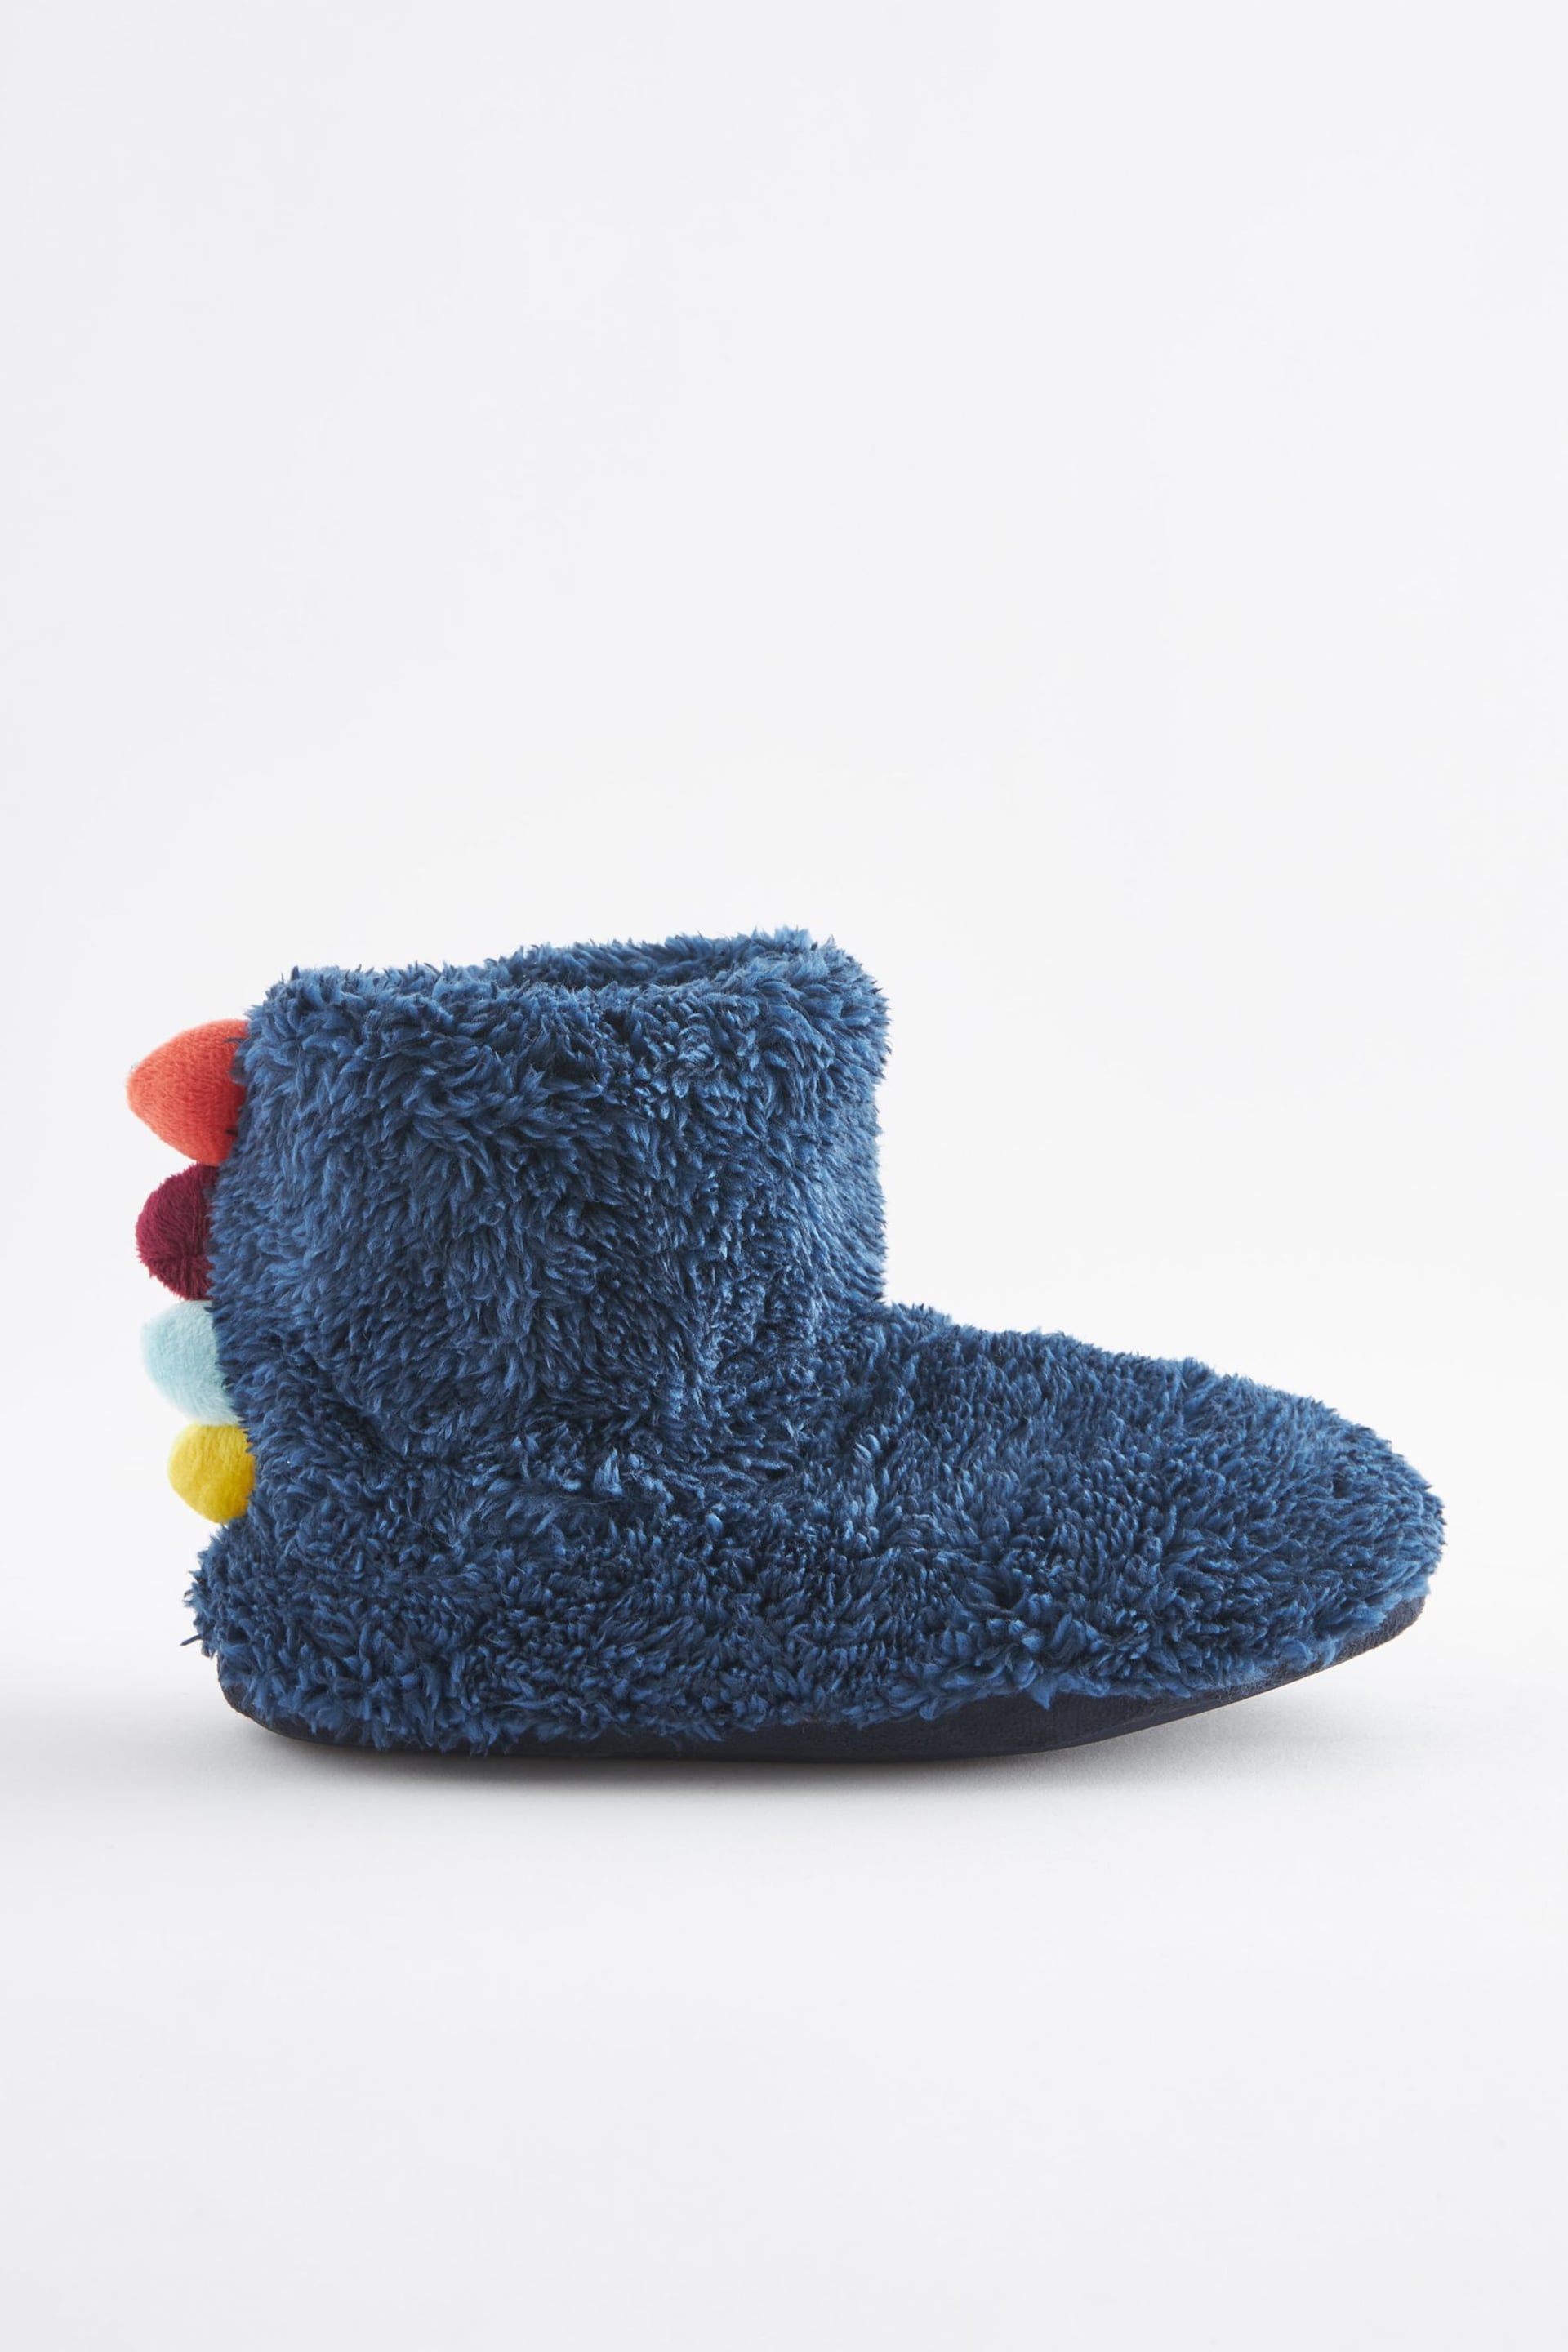 Blue Warm Lined Slipper Boots - Image 2 of 5